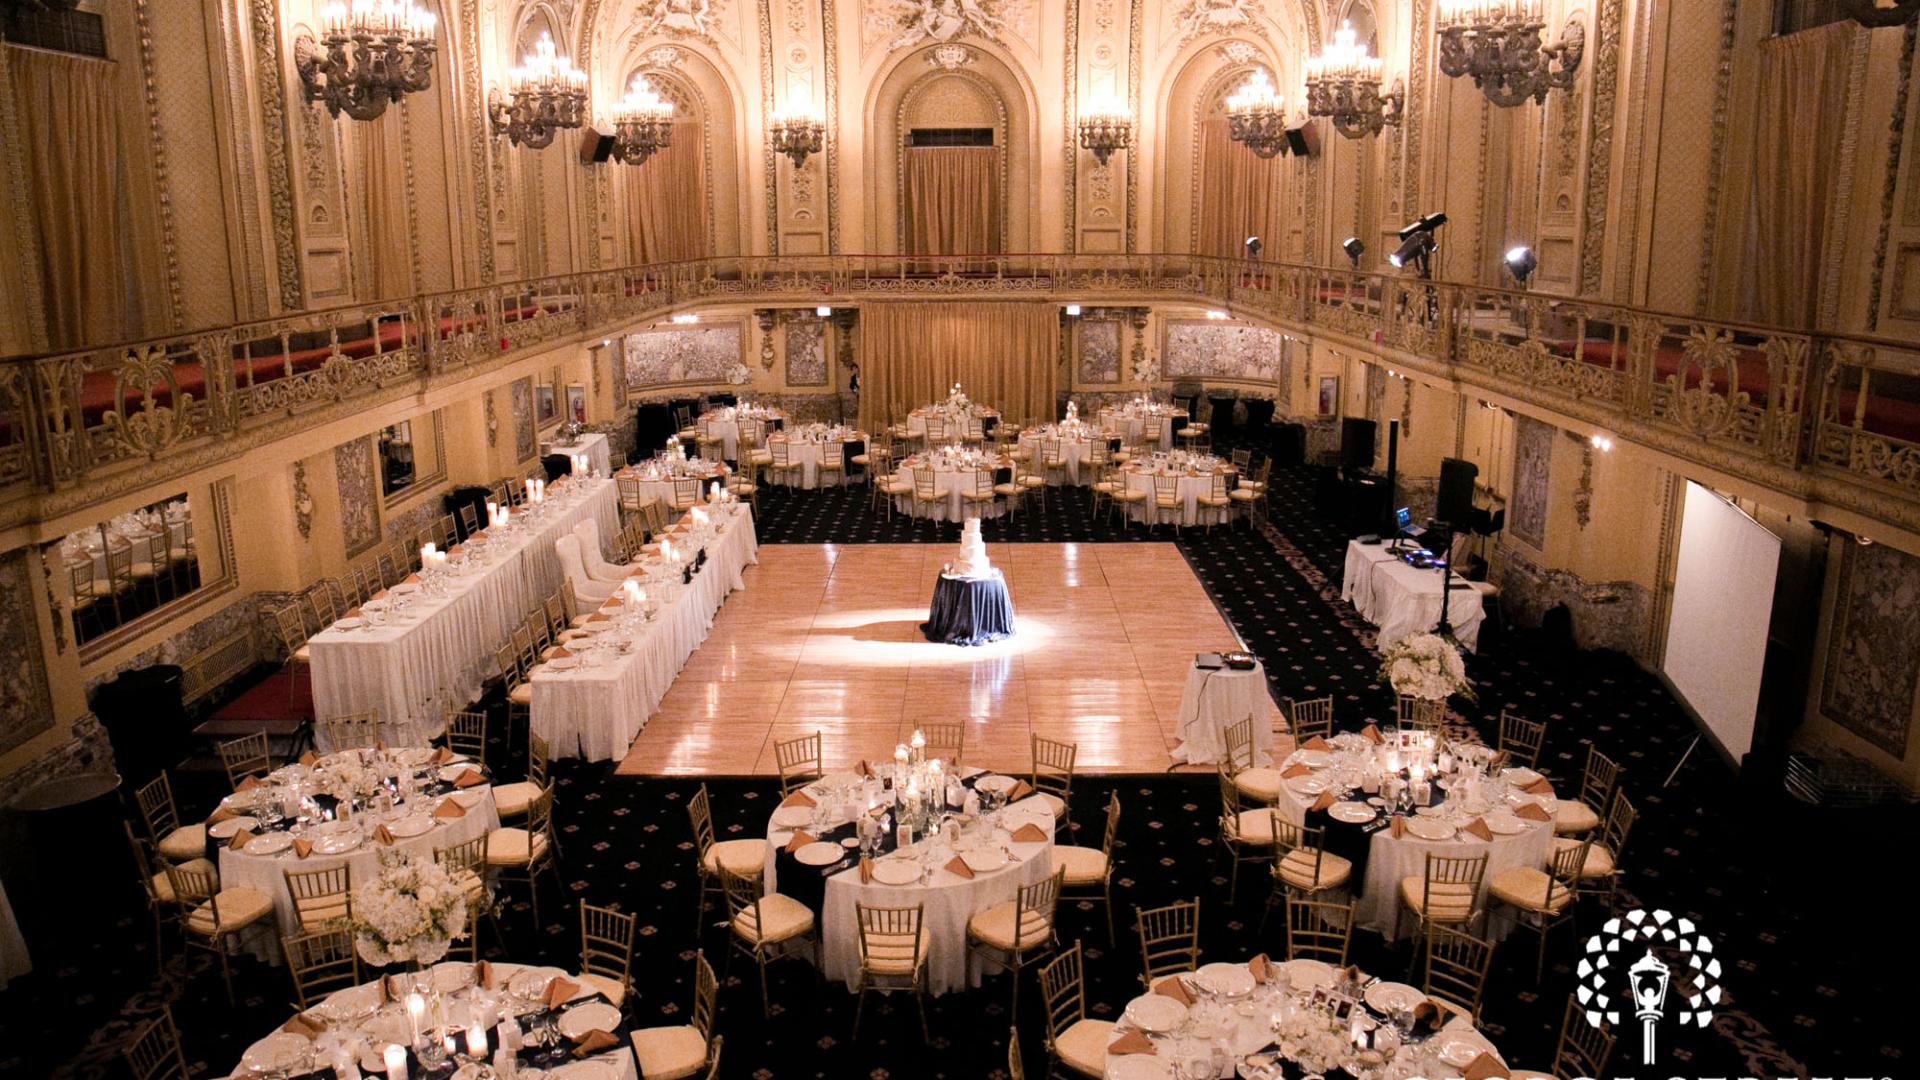 Winter Wedding Venues for Rent in Chicago, IL